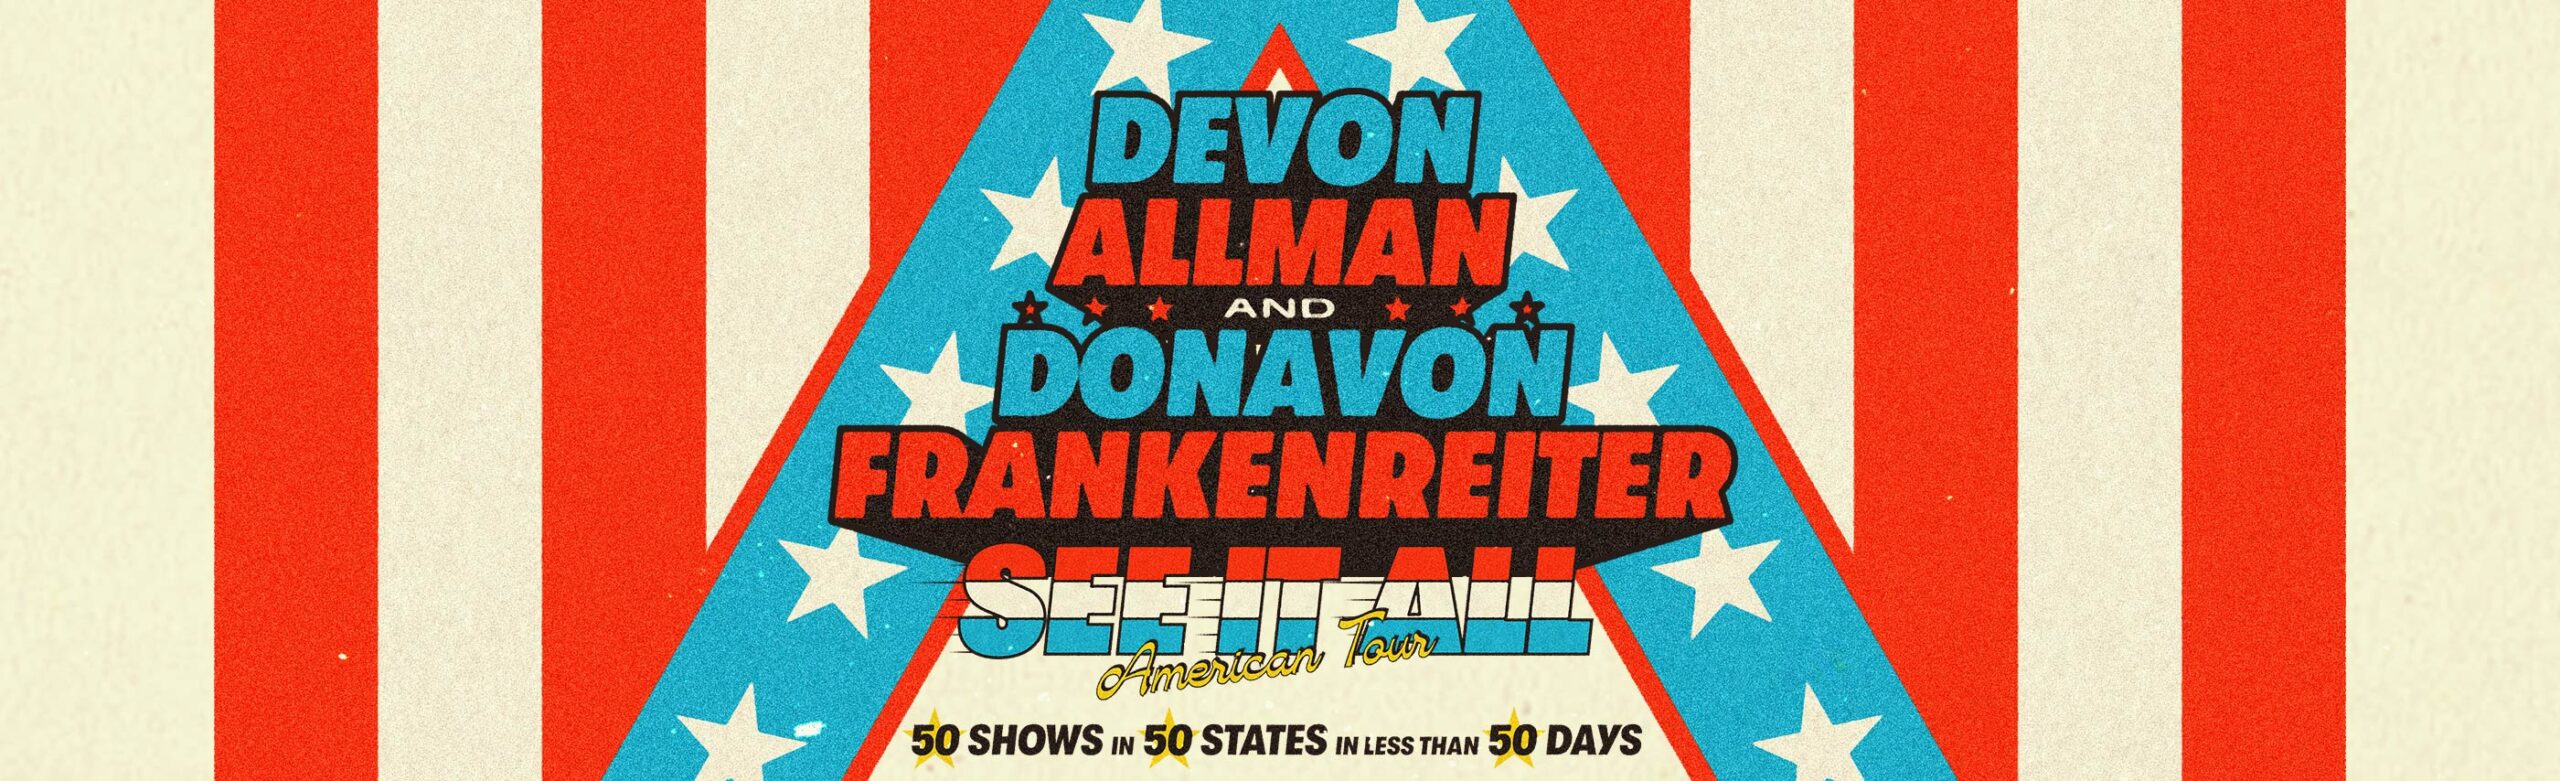 Devon Allman and Donavon Frankenreiter Announce See It All American Tour Stop at The Top Hat Image